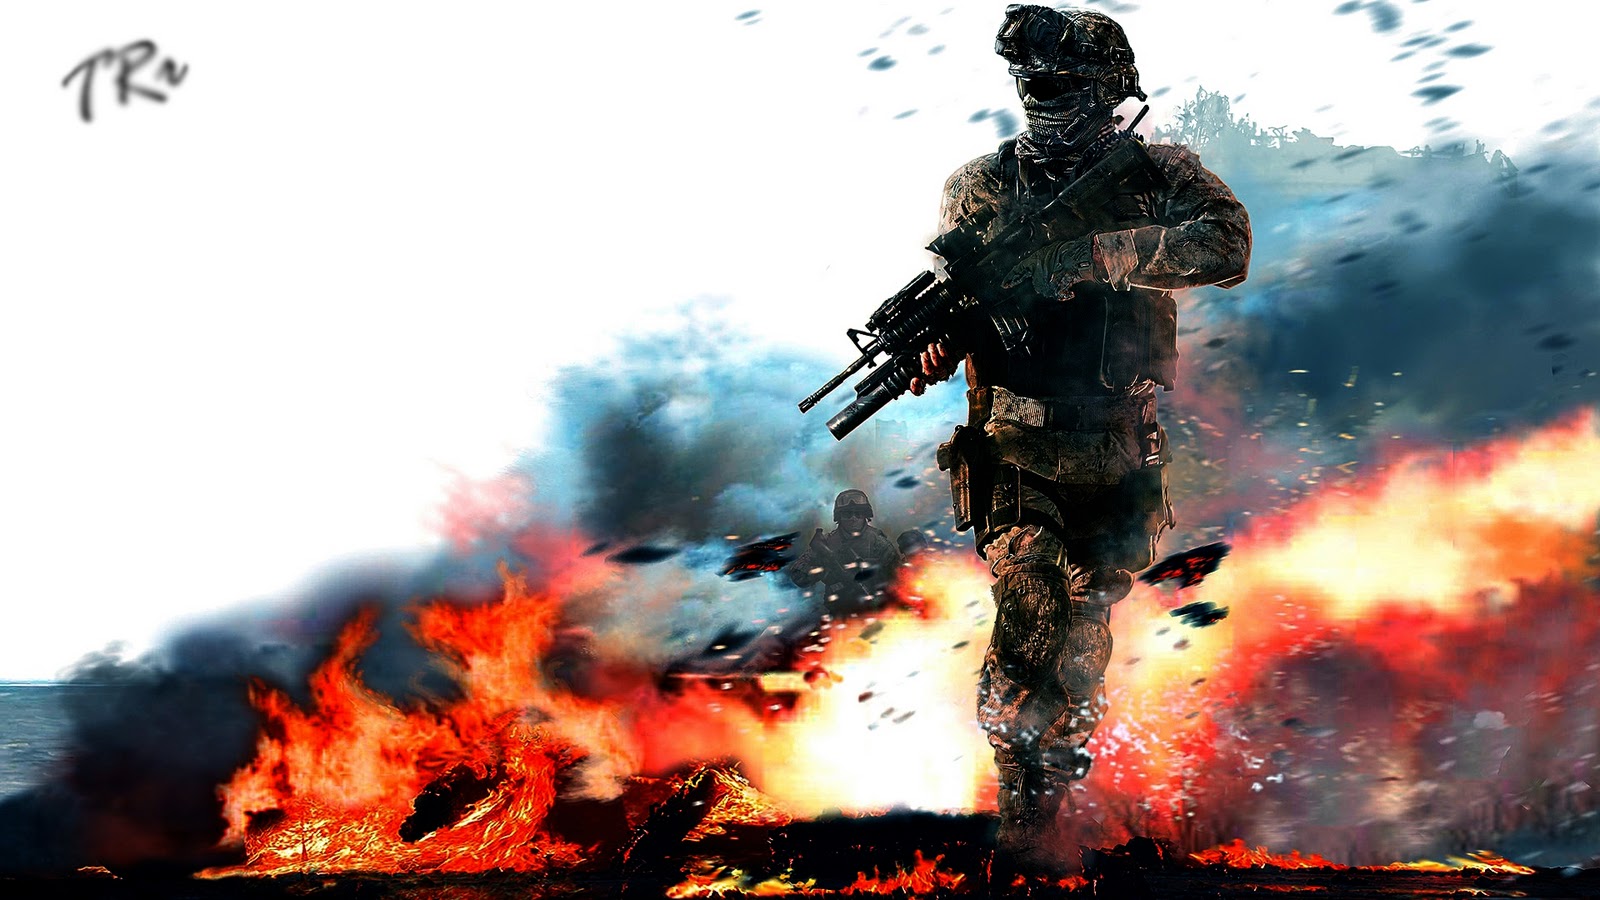 Call of Duty Black Ops HD Wallpapers 1900x1200 Download 1600x900